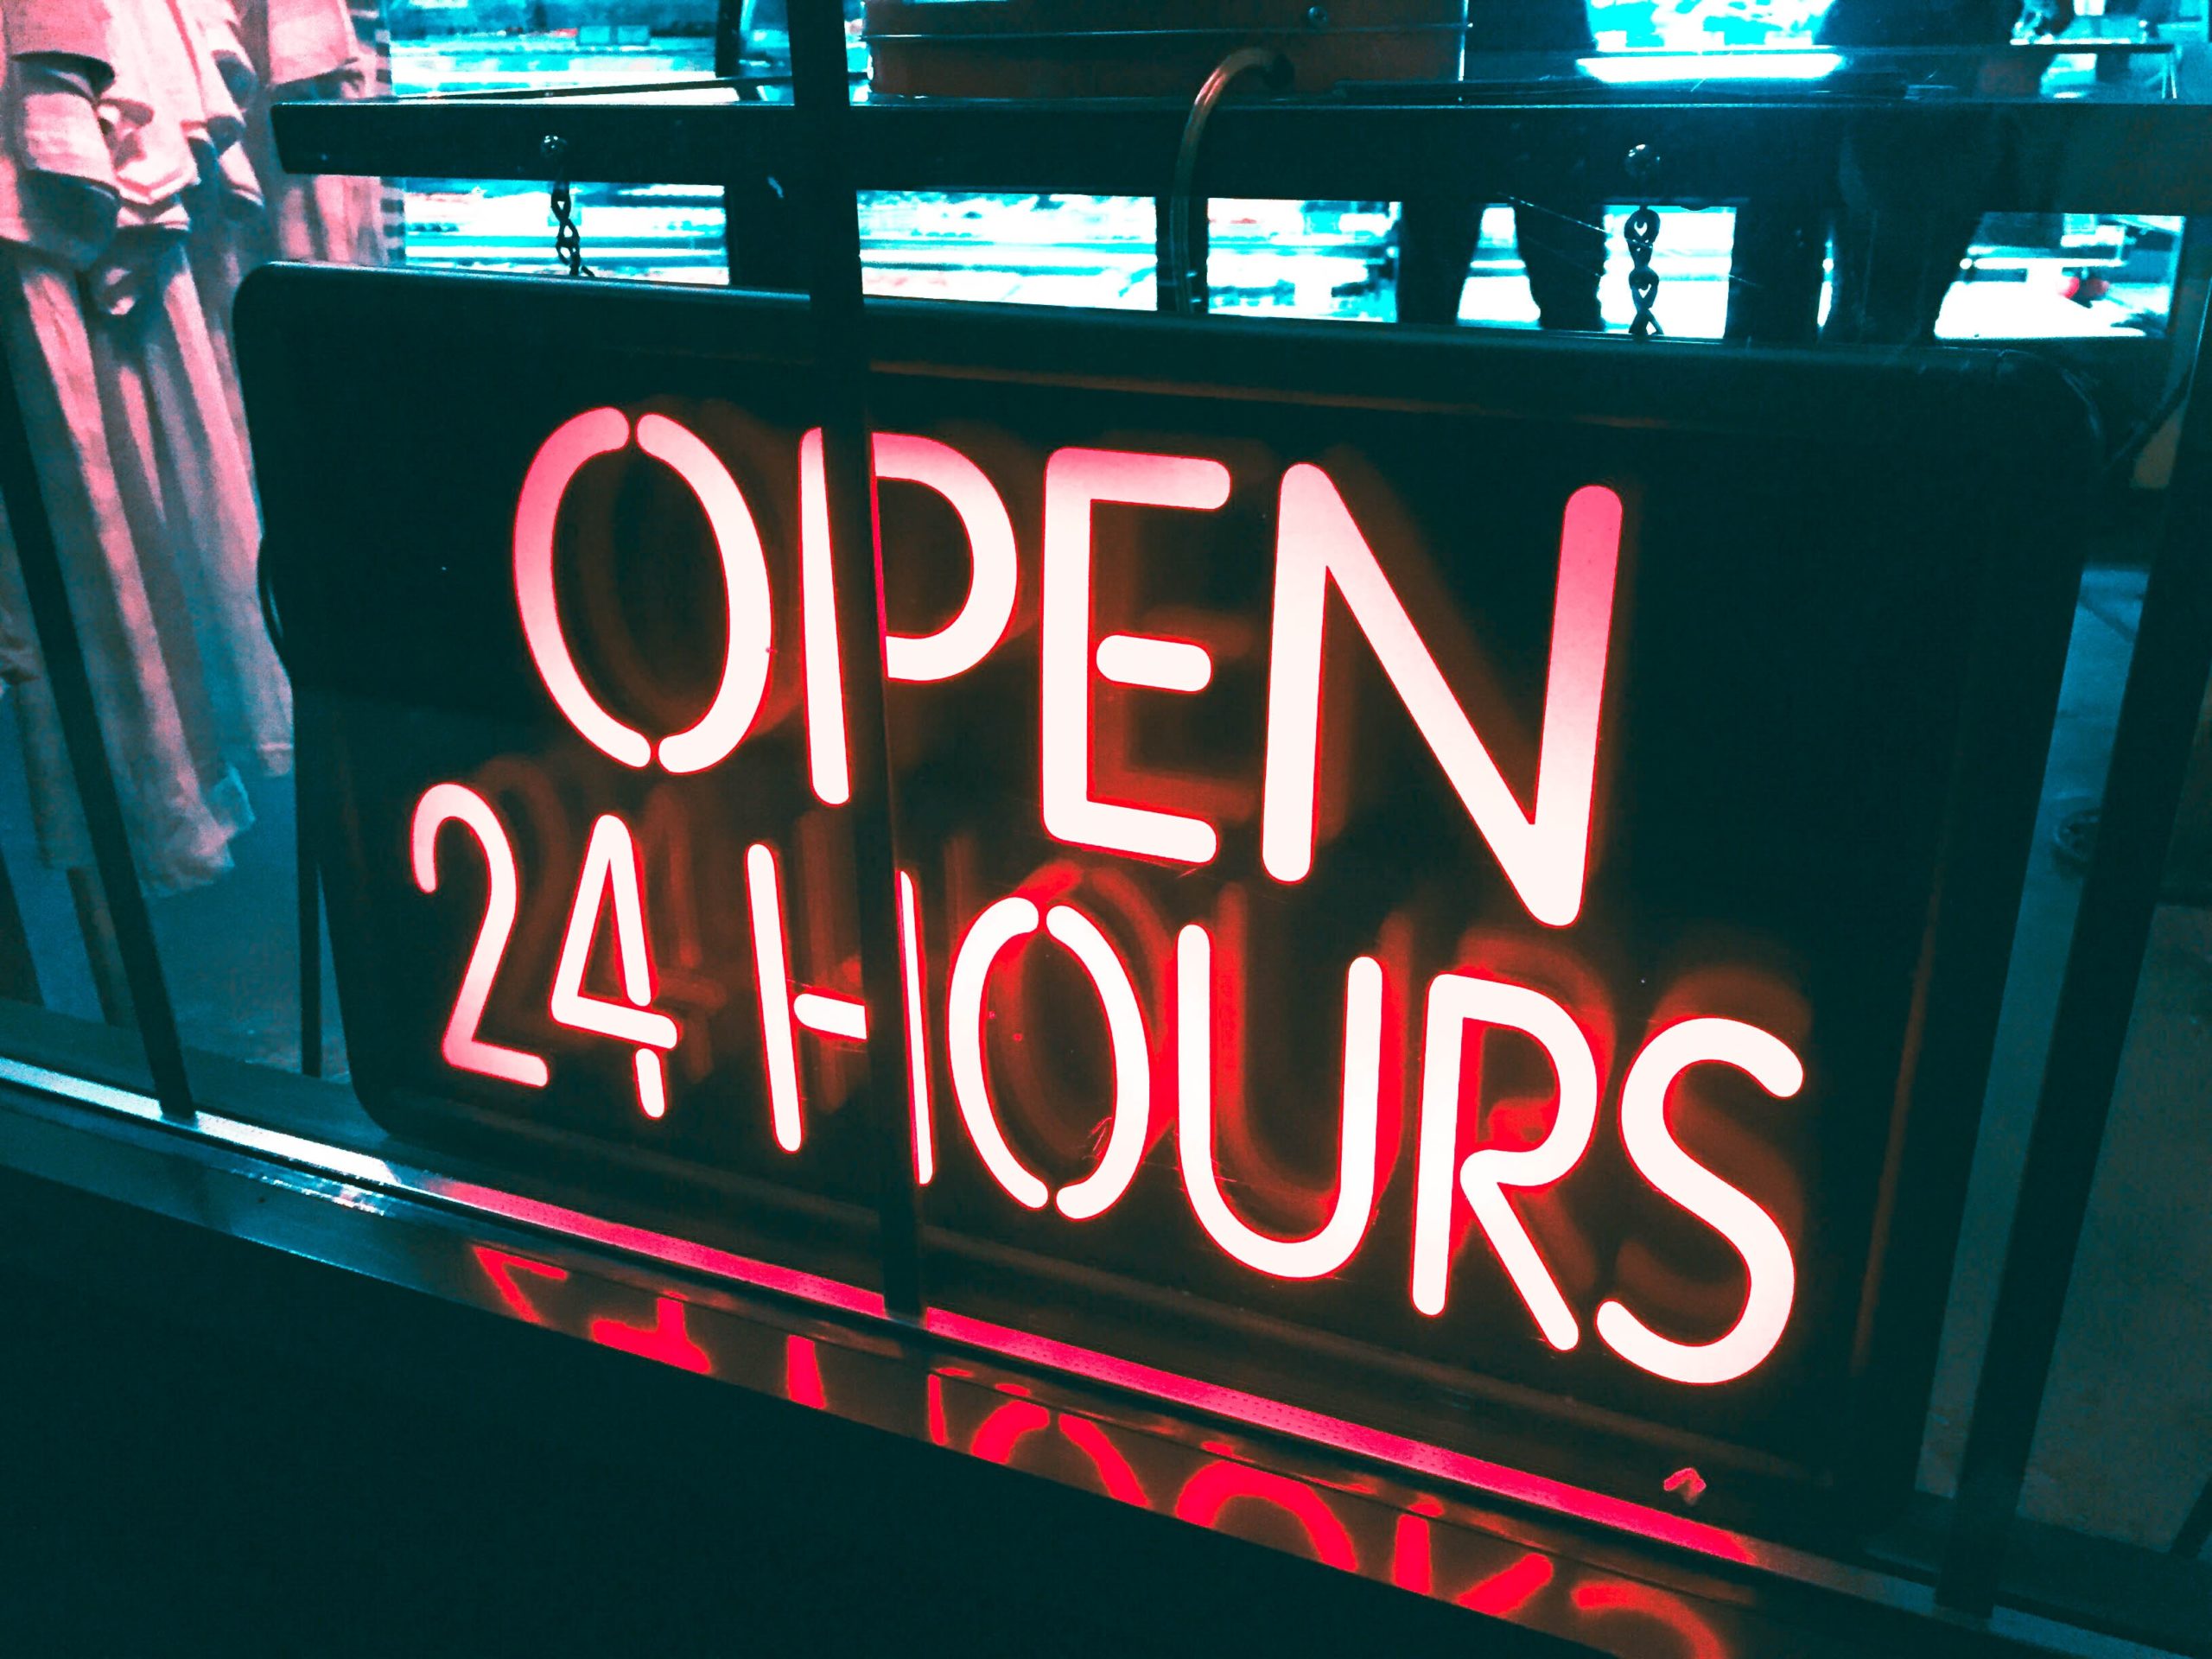 The Benefits For Small Businesses With 24 Hour Phone Answering Services